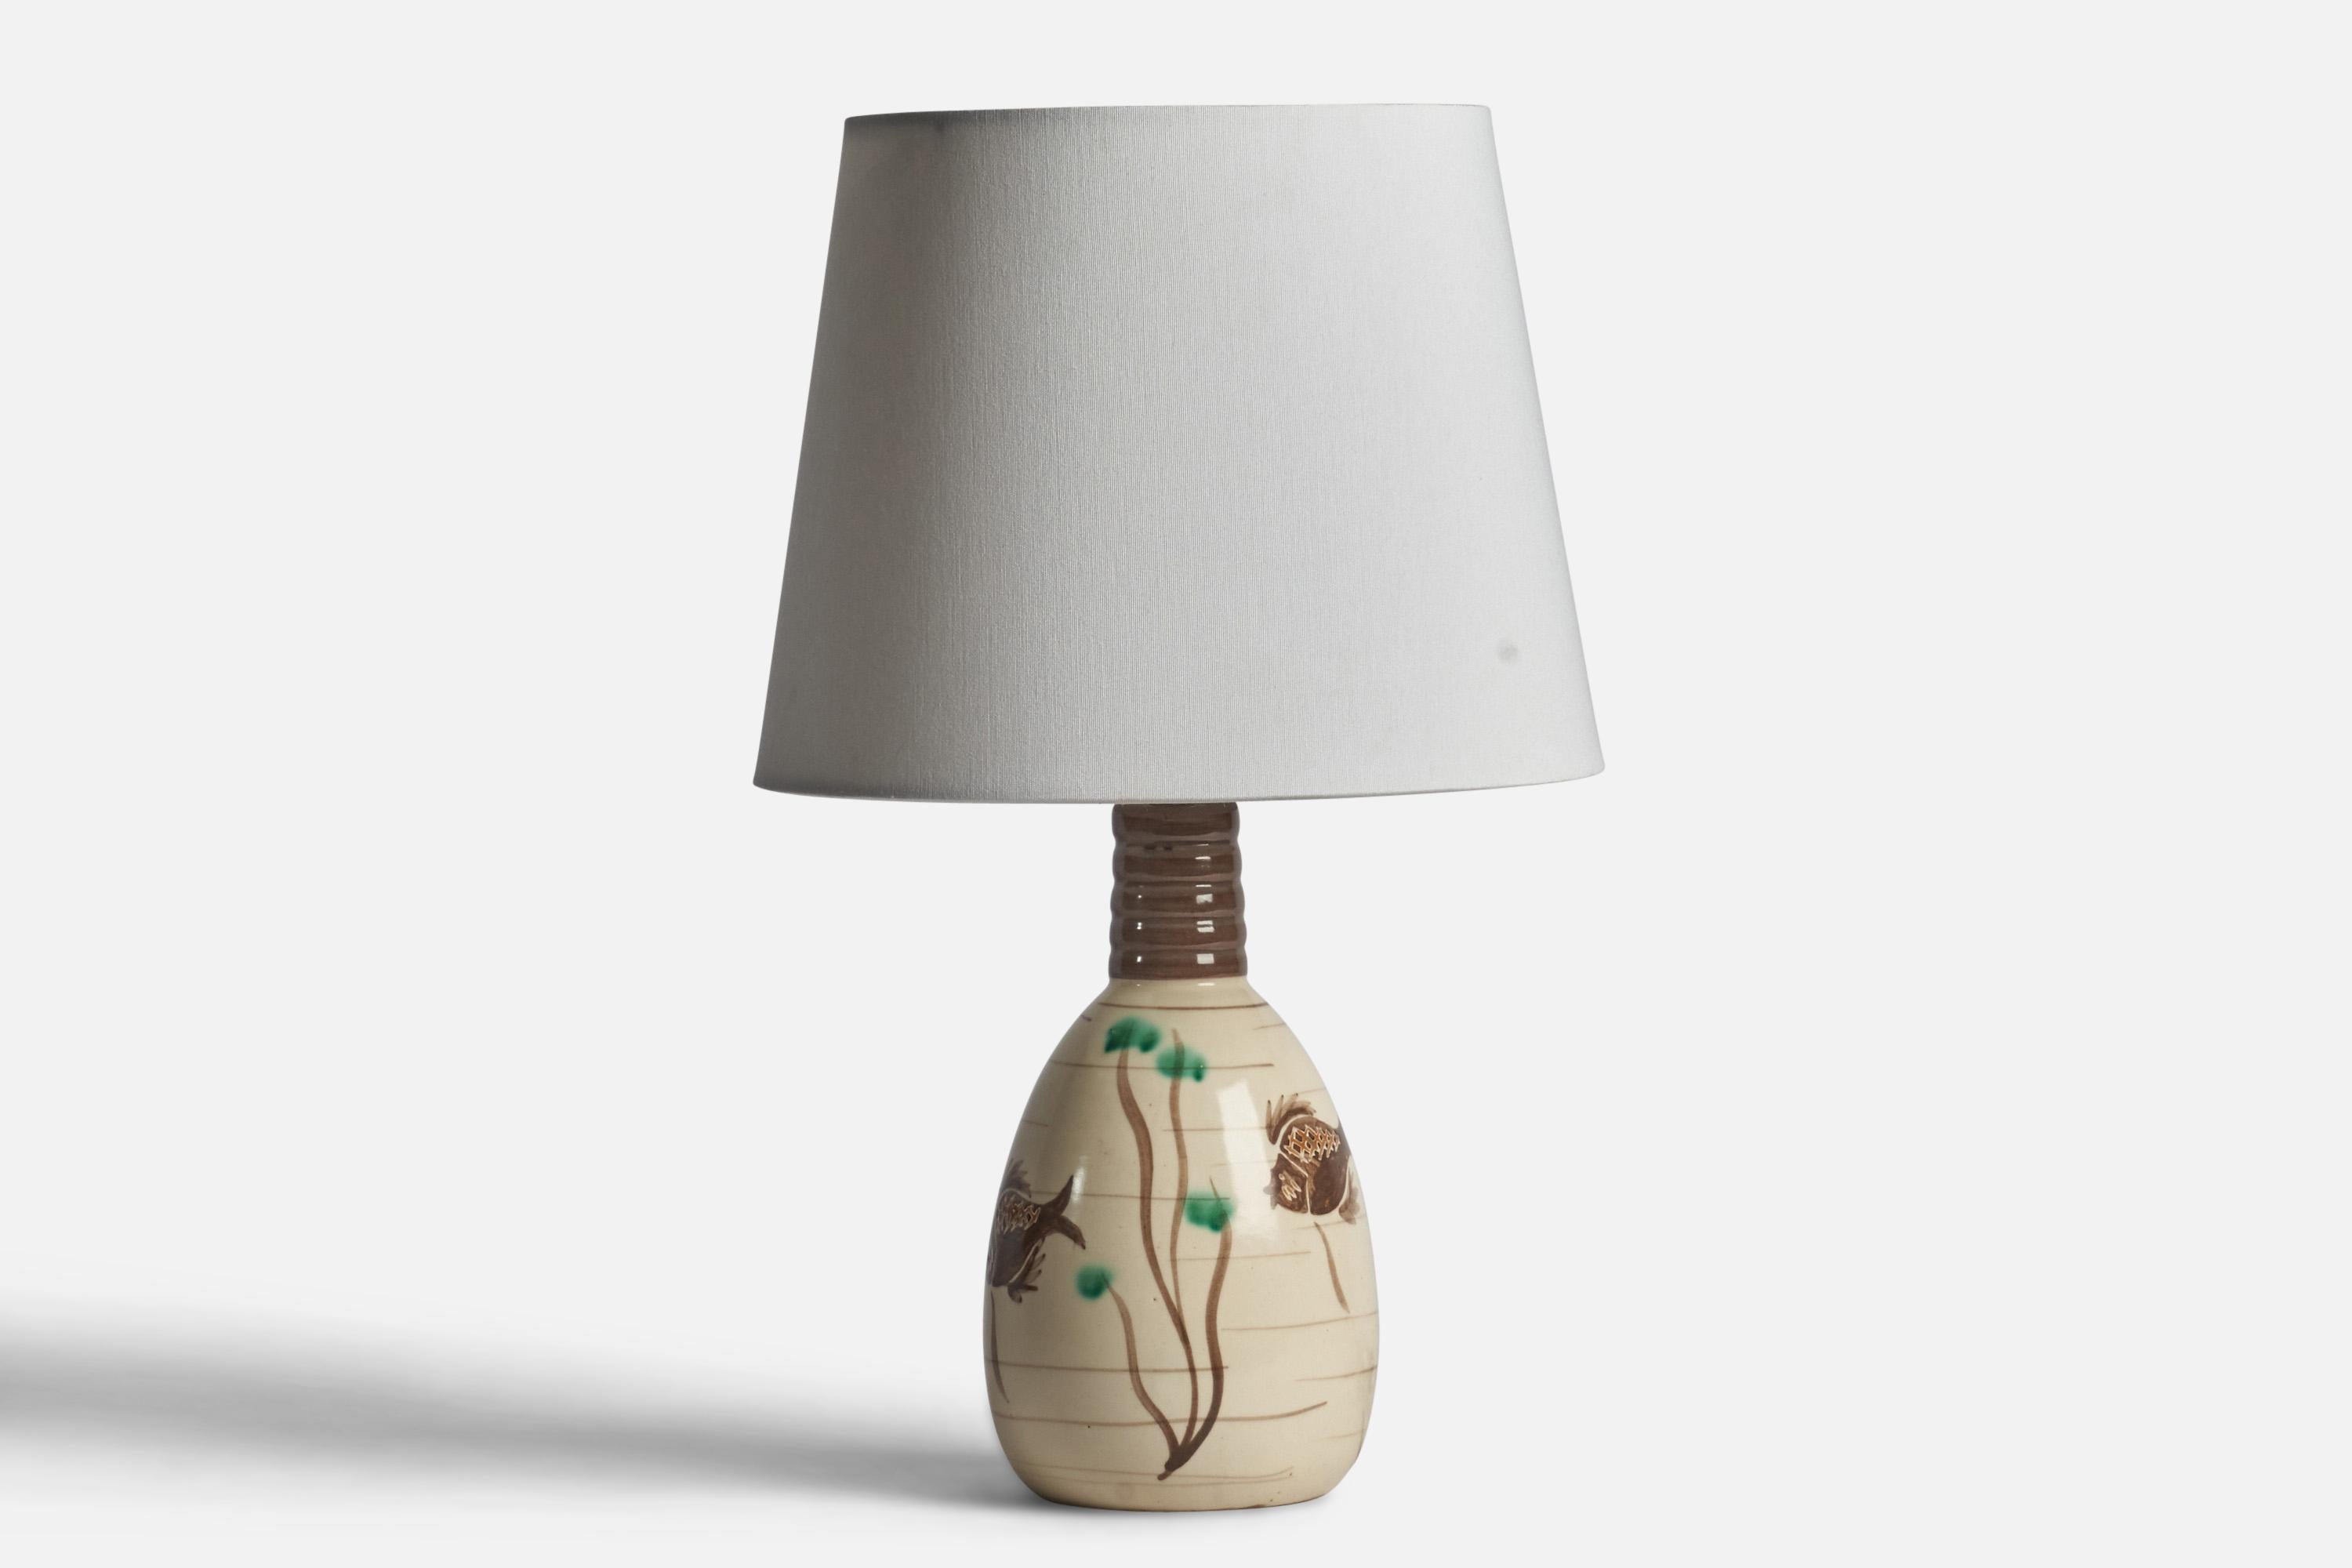 A hand-painted off-white and brown table lamp designed and produced in Denmark, c. 1940s.

“Terra Danica 590 AF” stamp on bottom.

Dimensions of Lamp (inches): 11.5” H x 5” Diameter
Dimensions of Shade (inches): 7.5” Top Diameter x 10” Bottom